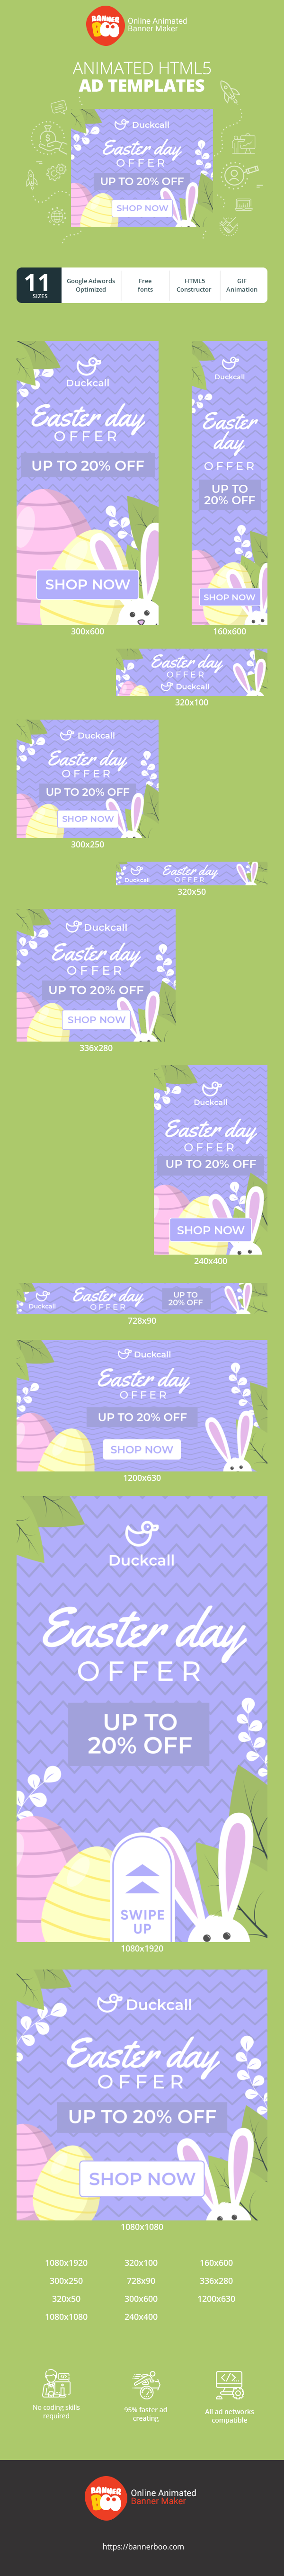 Banner ad template — Easter Day Offer — Up To 20% Off